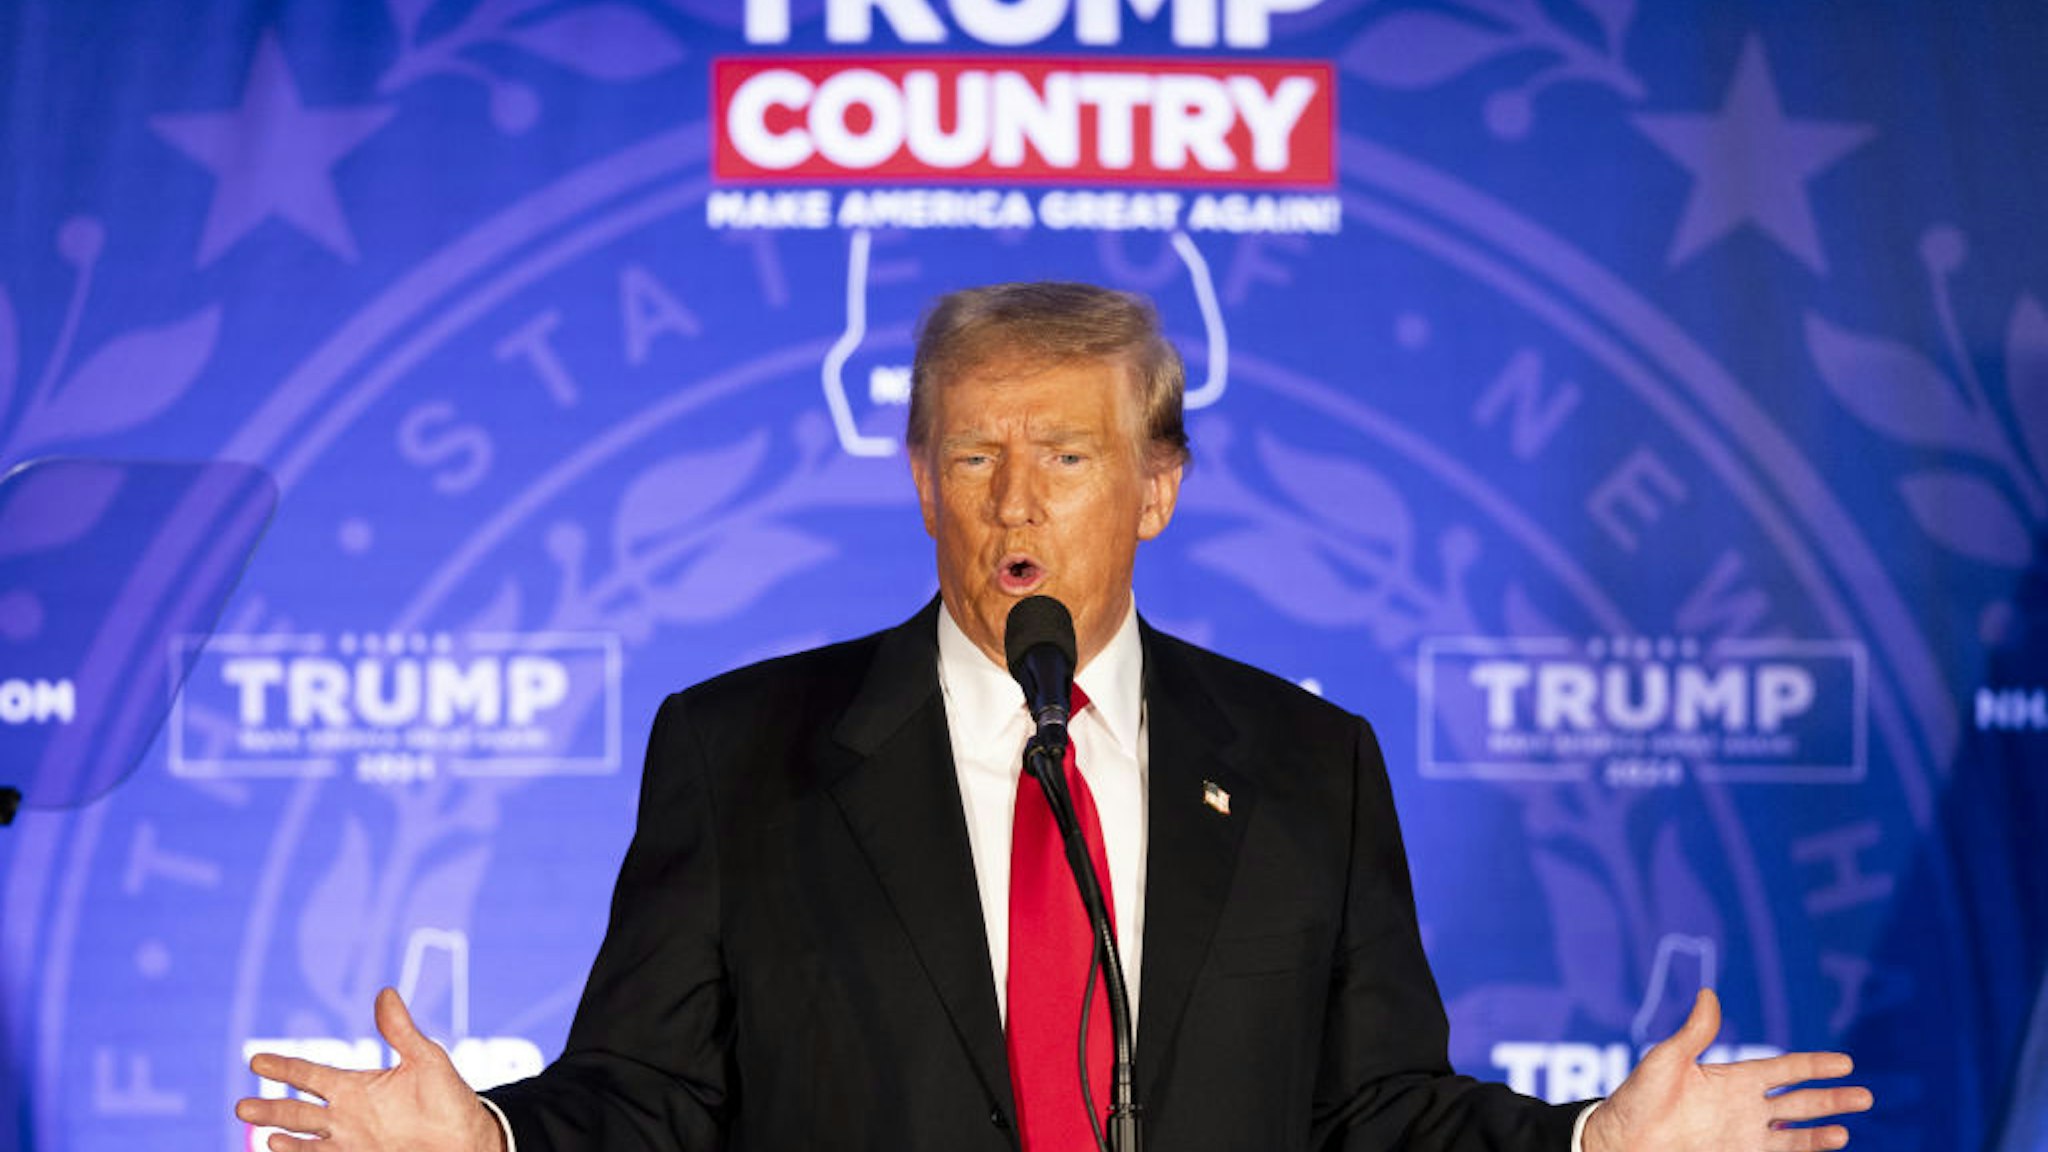 Former US President Donald Trump speaks during a campaign event in Portsmouth, New Hampshire, US, on Wednesday, Jan. 17, 2024. Trump signaled he would again make his stance on China a key part of his US presidential campaign strategy, drawing an unsubstantiated correlation between turbulence in the nations equity markets and his runaway Iowa Republican caucus victory.